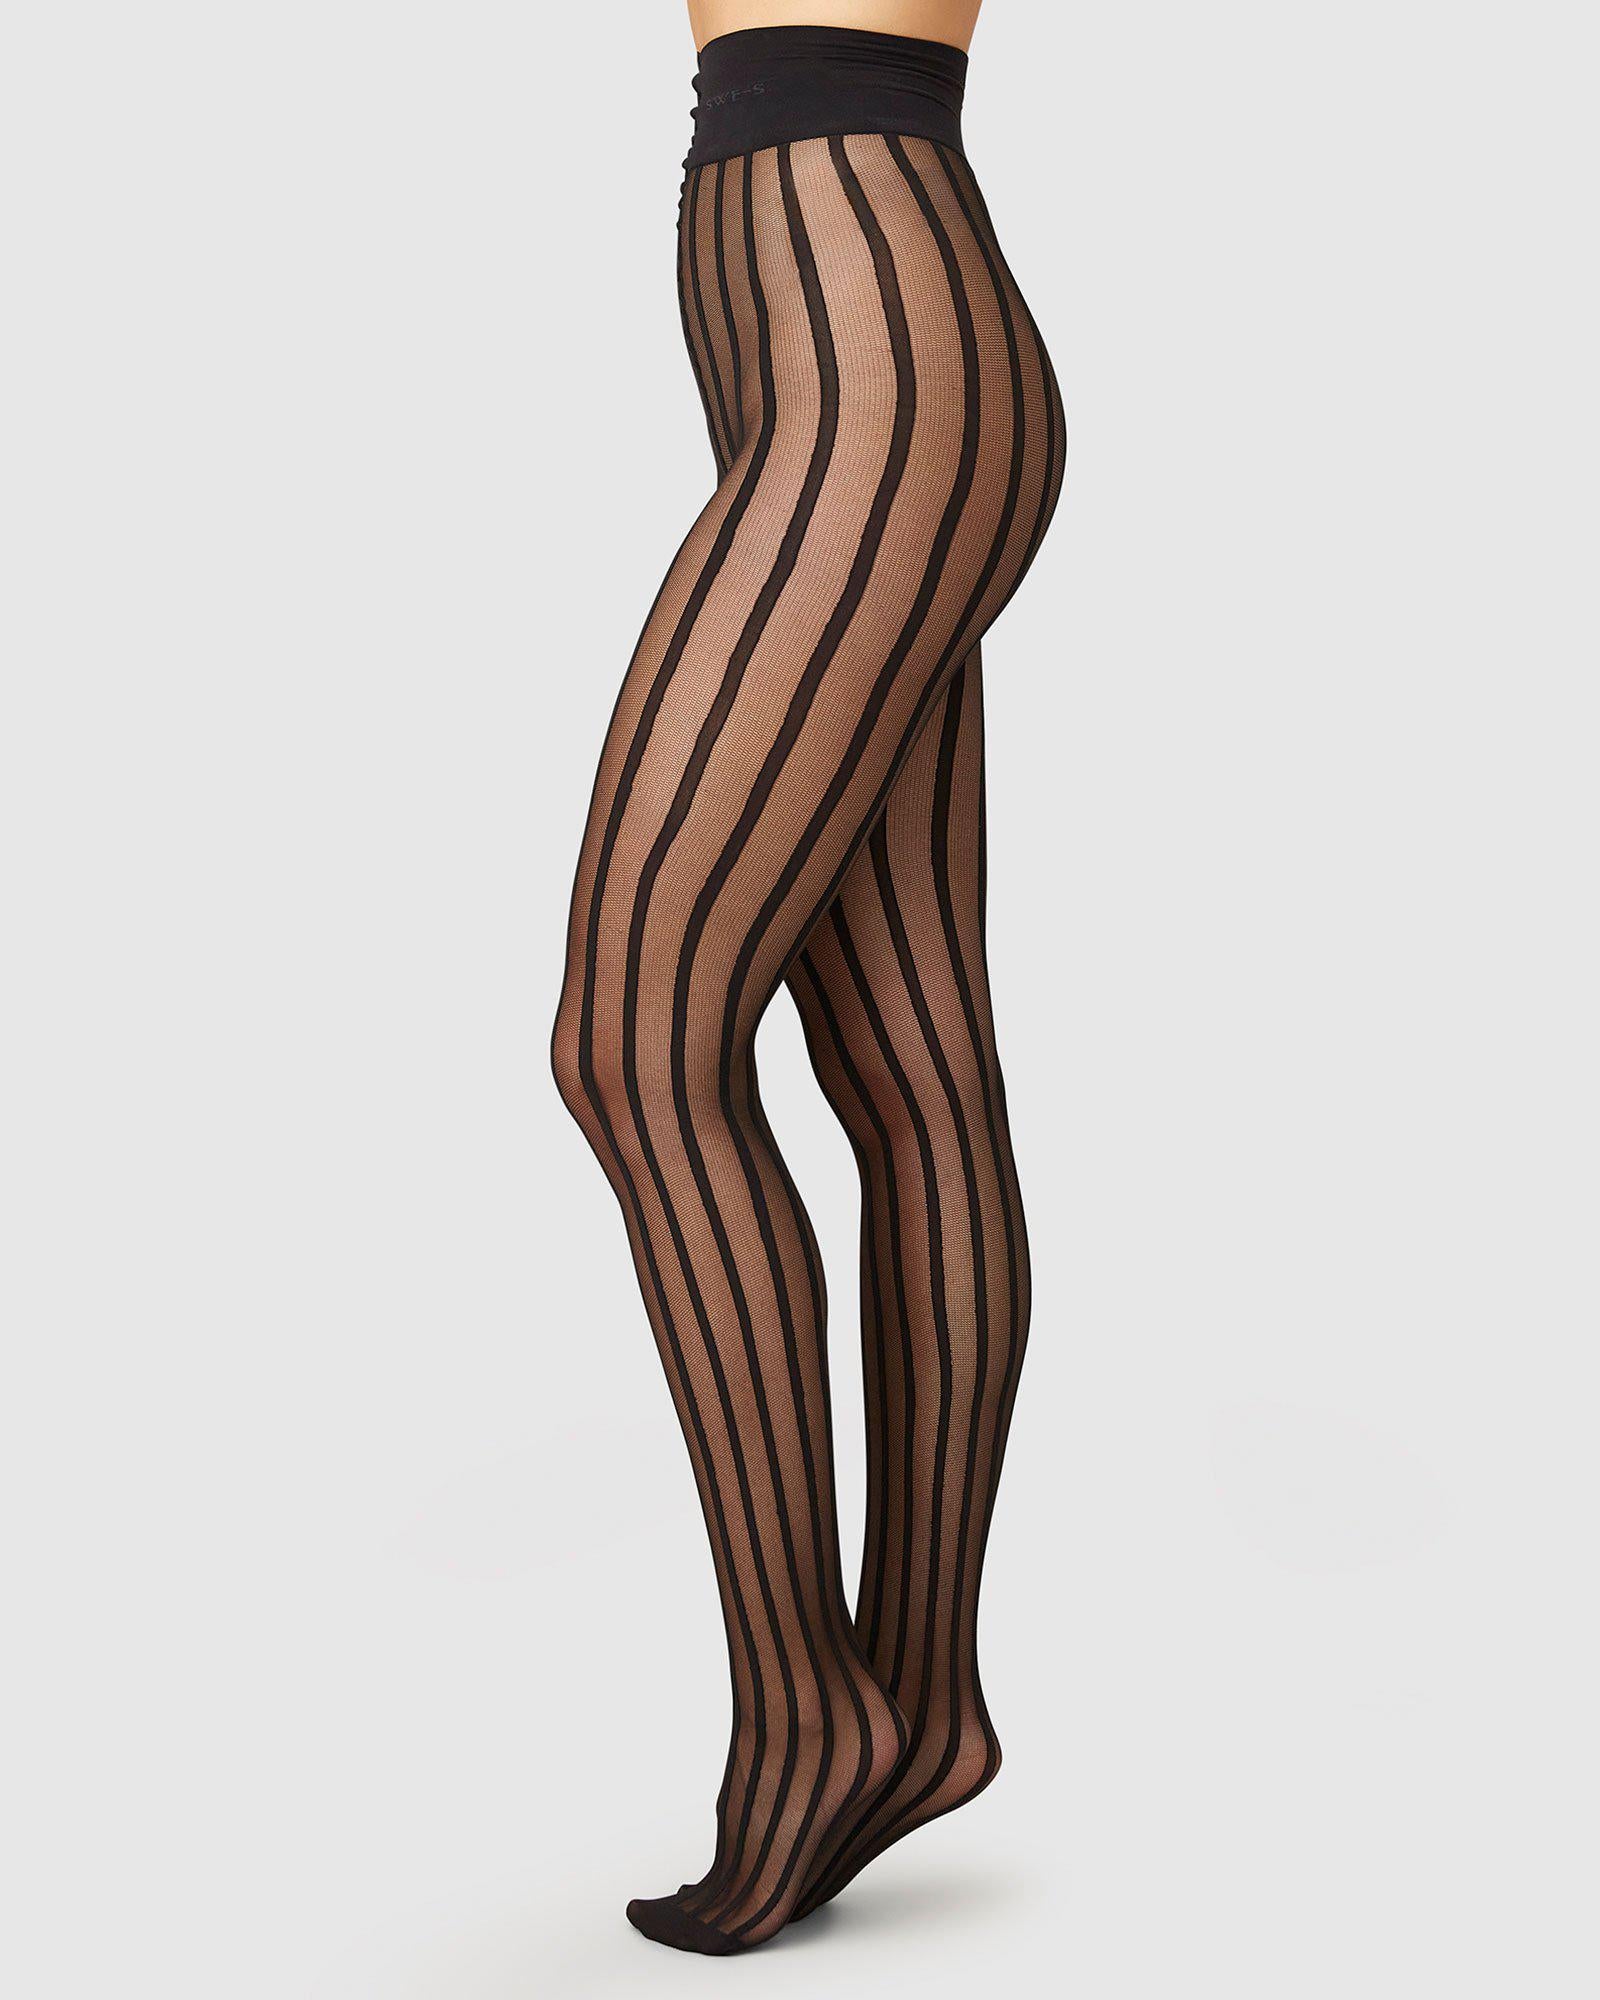 Striped Stockings & Leggings - Vertical Striped Tights